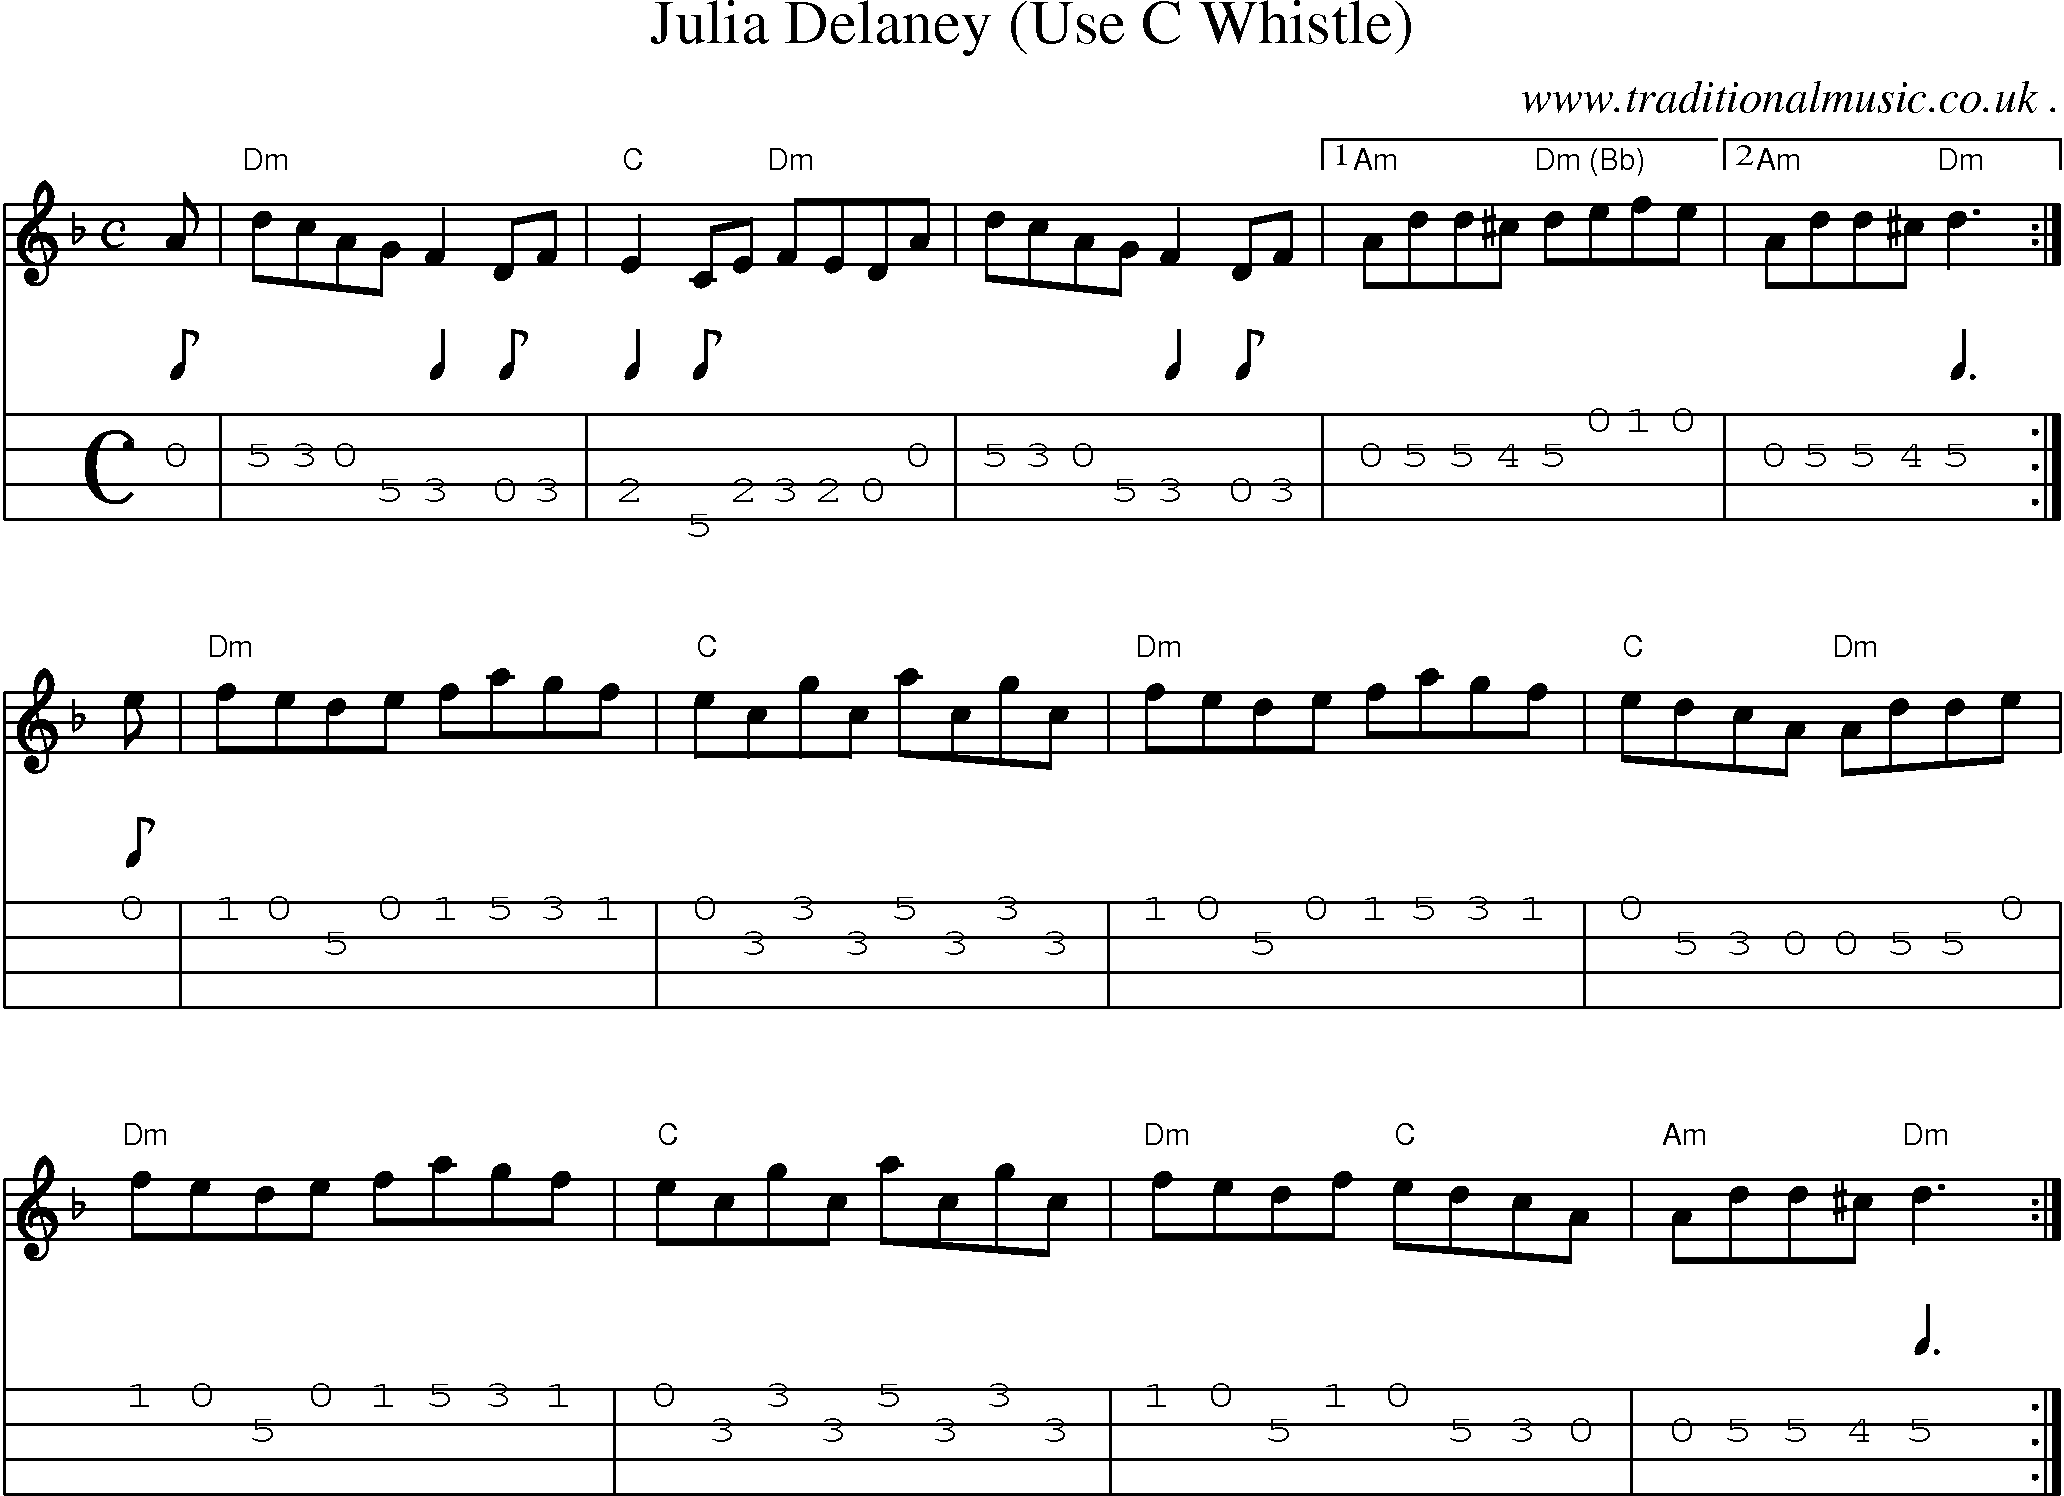 Sheet-music  score, Chords and Mandolin Tabs for Julia Delaney Use C Whistle